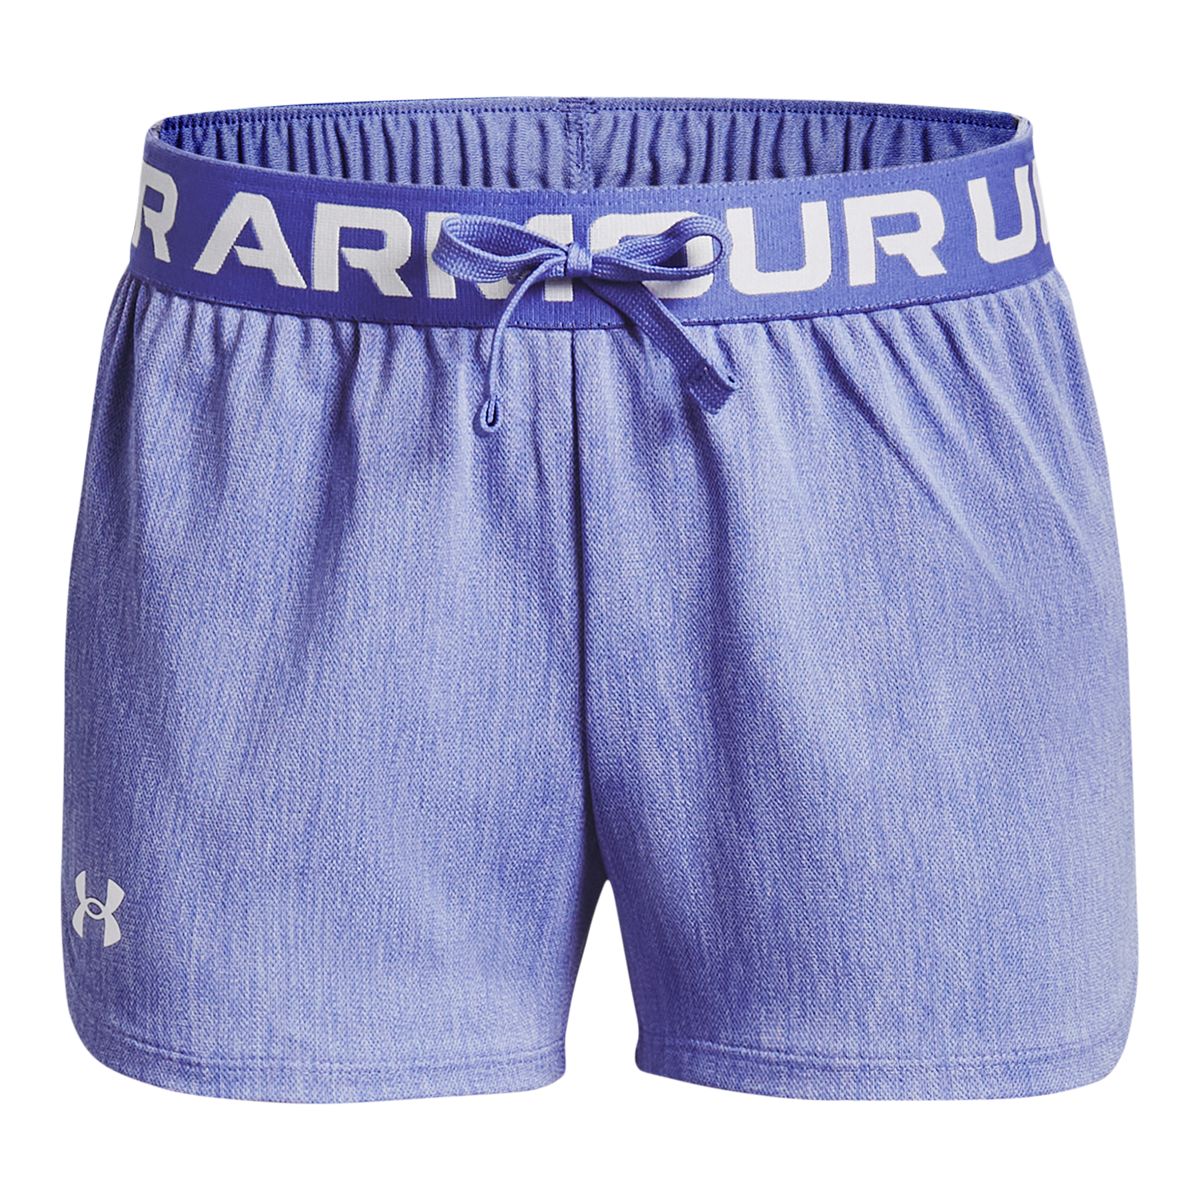 Under Armour Girls' Play Up Twist Shorts